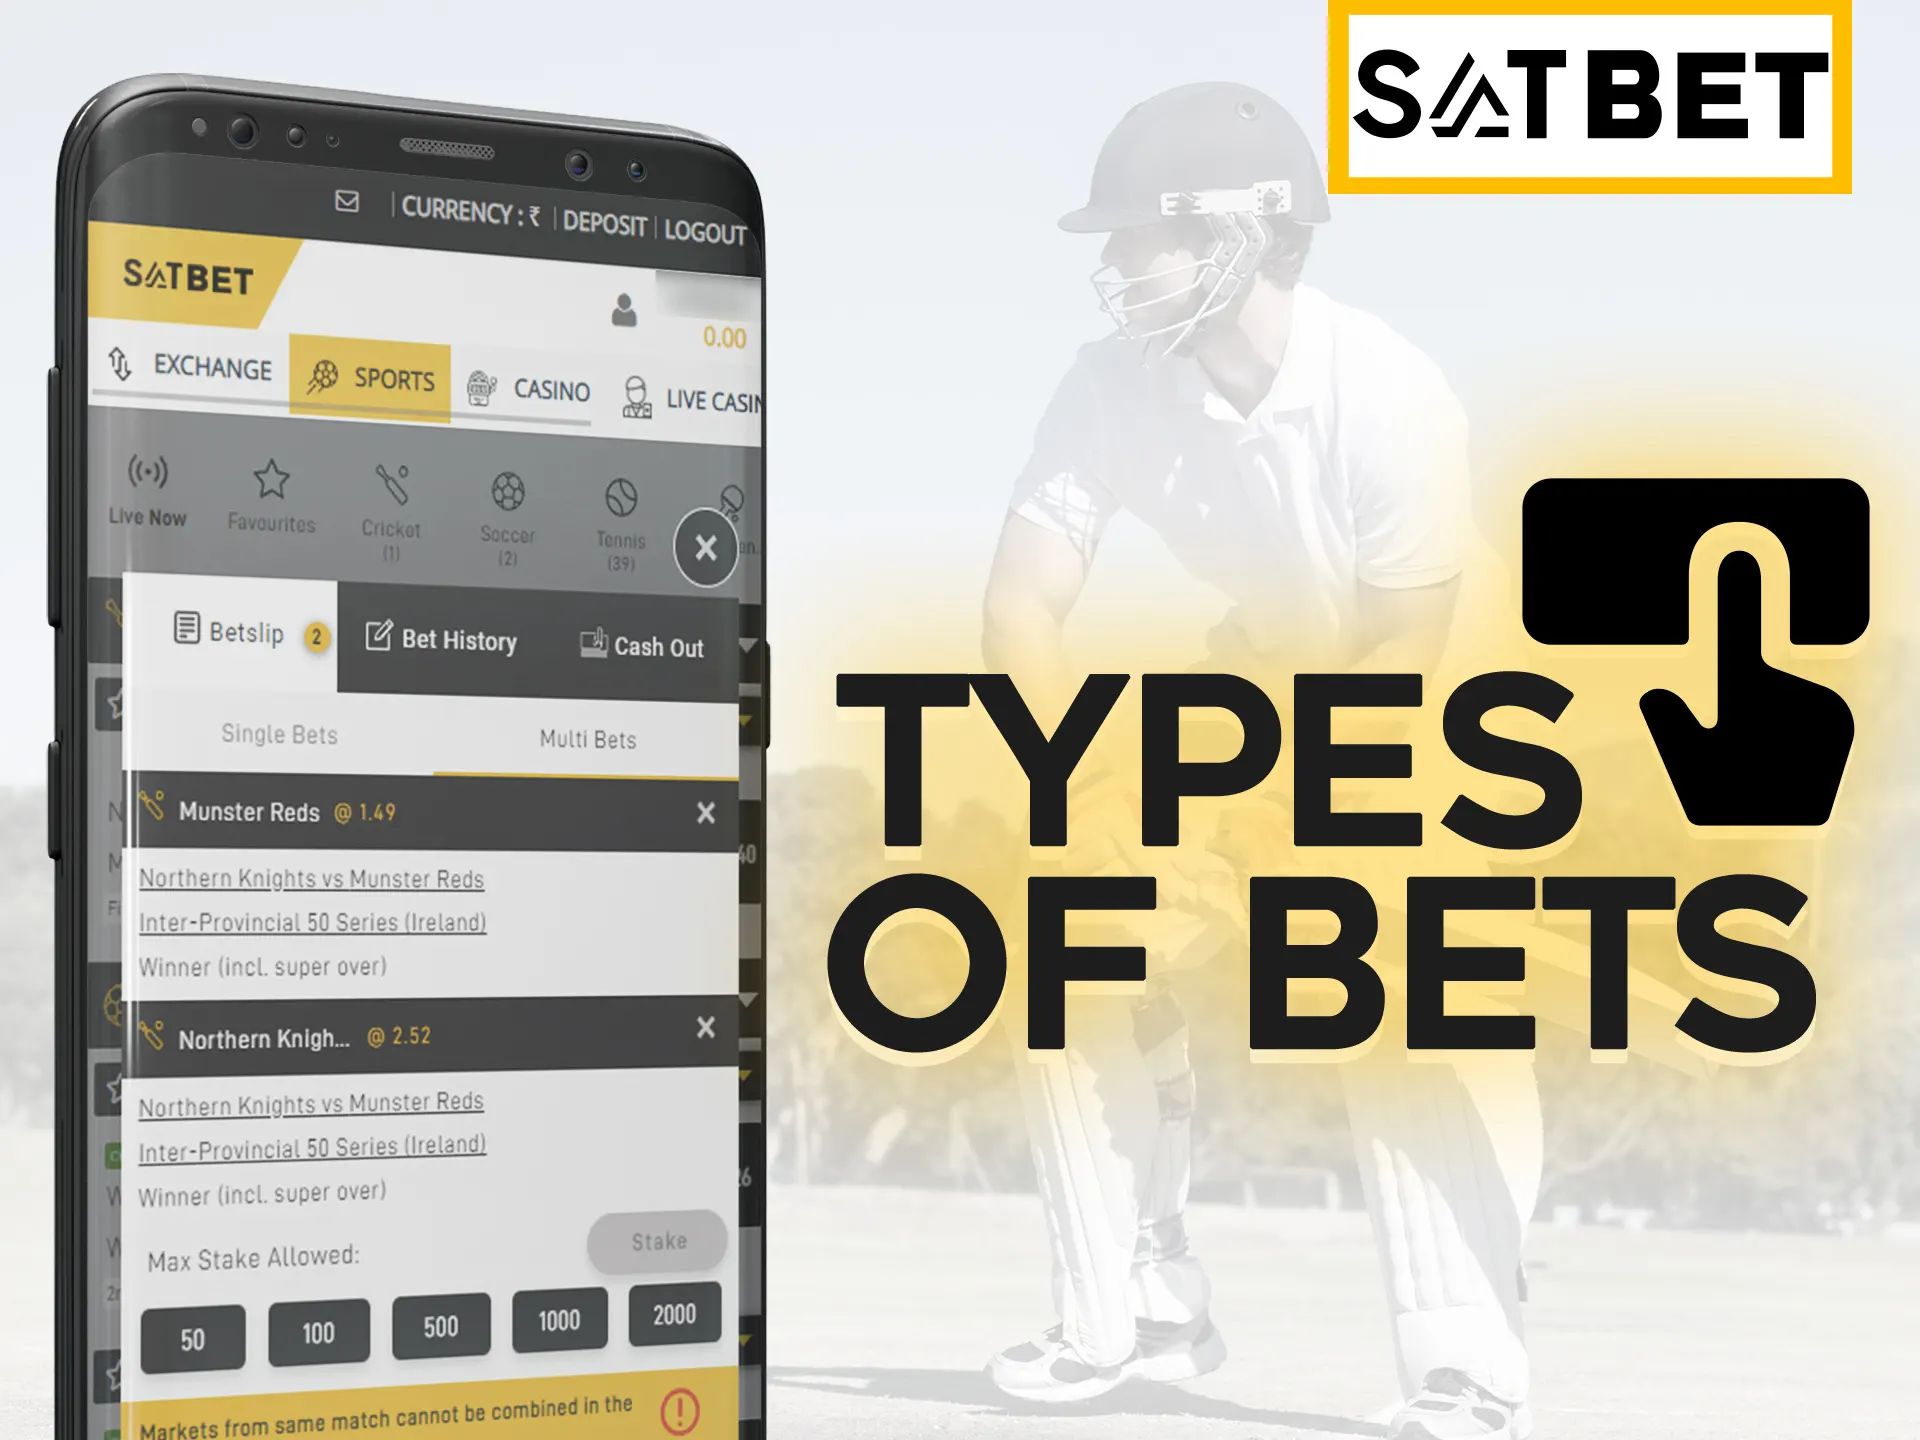 Learn more about Satbet types of bets by making bets.